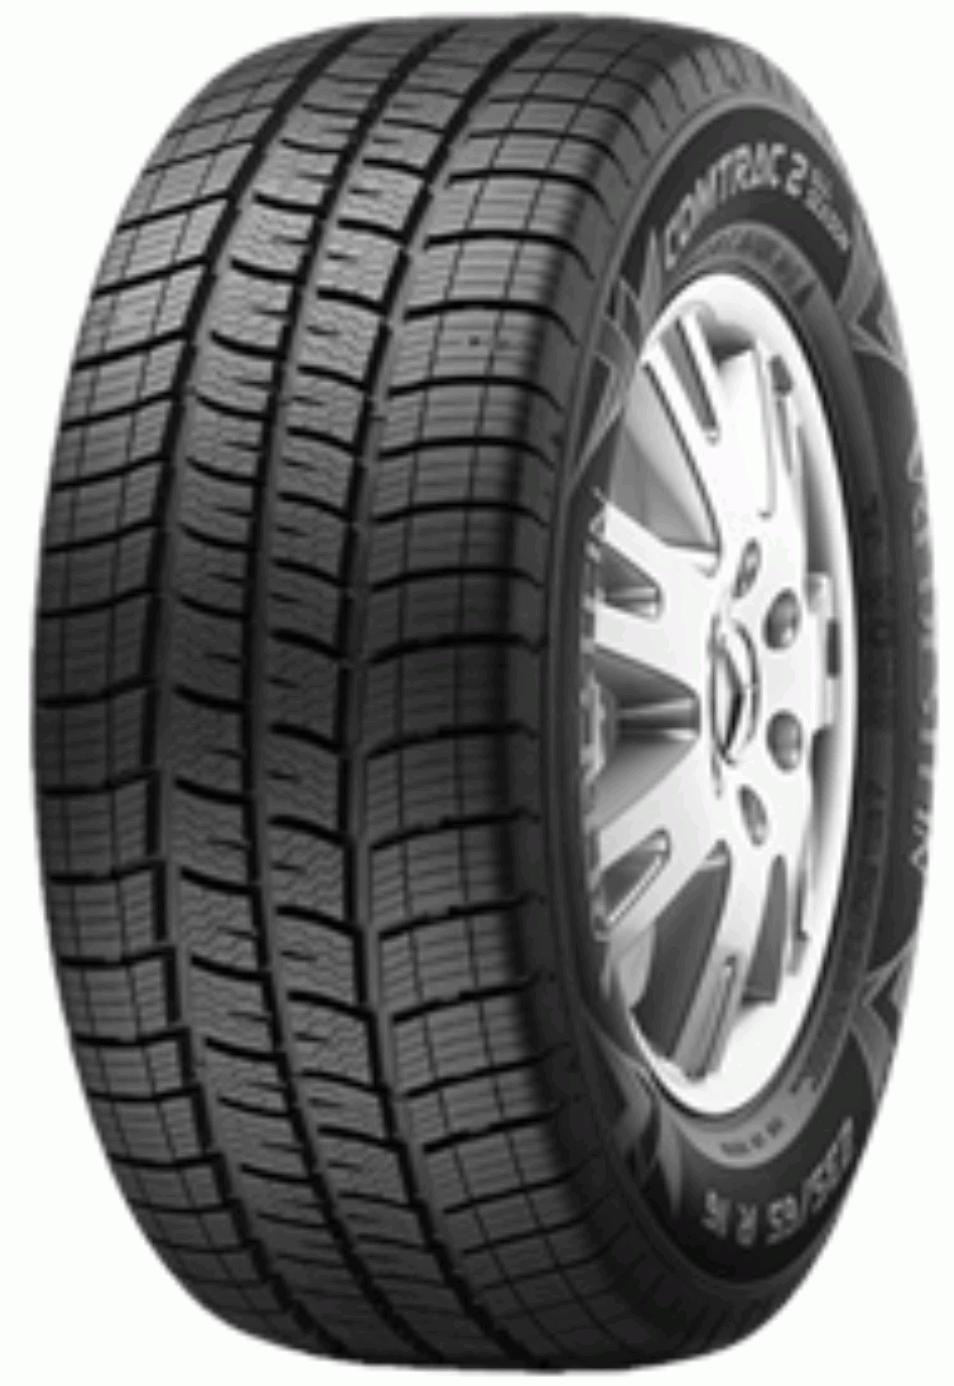 Vredestein Comtrac - Reviews 2 Tests All Tyre and Season